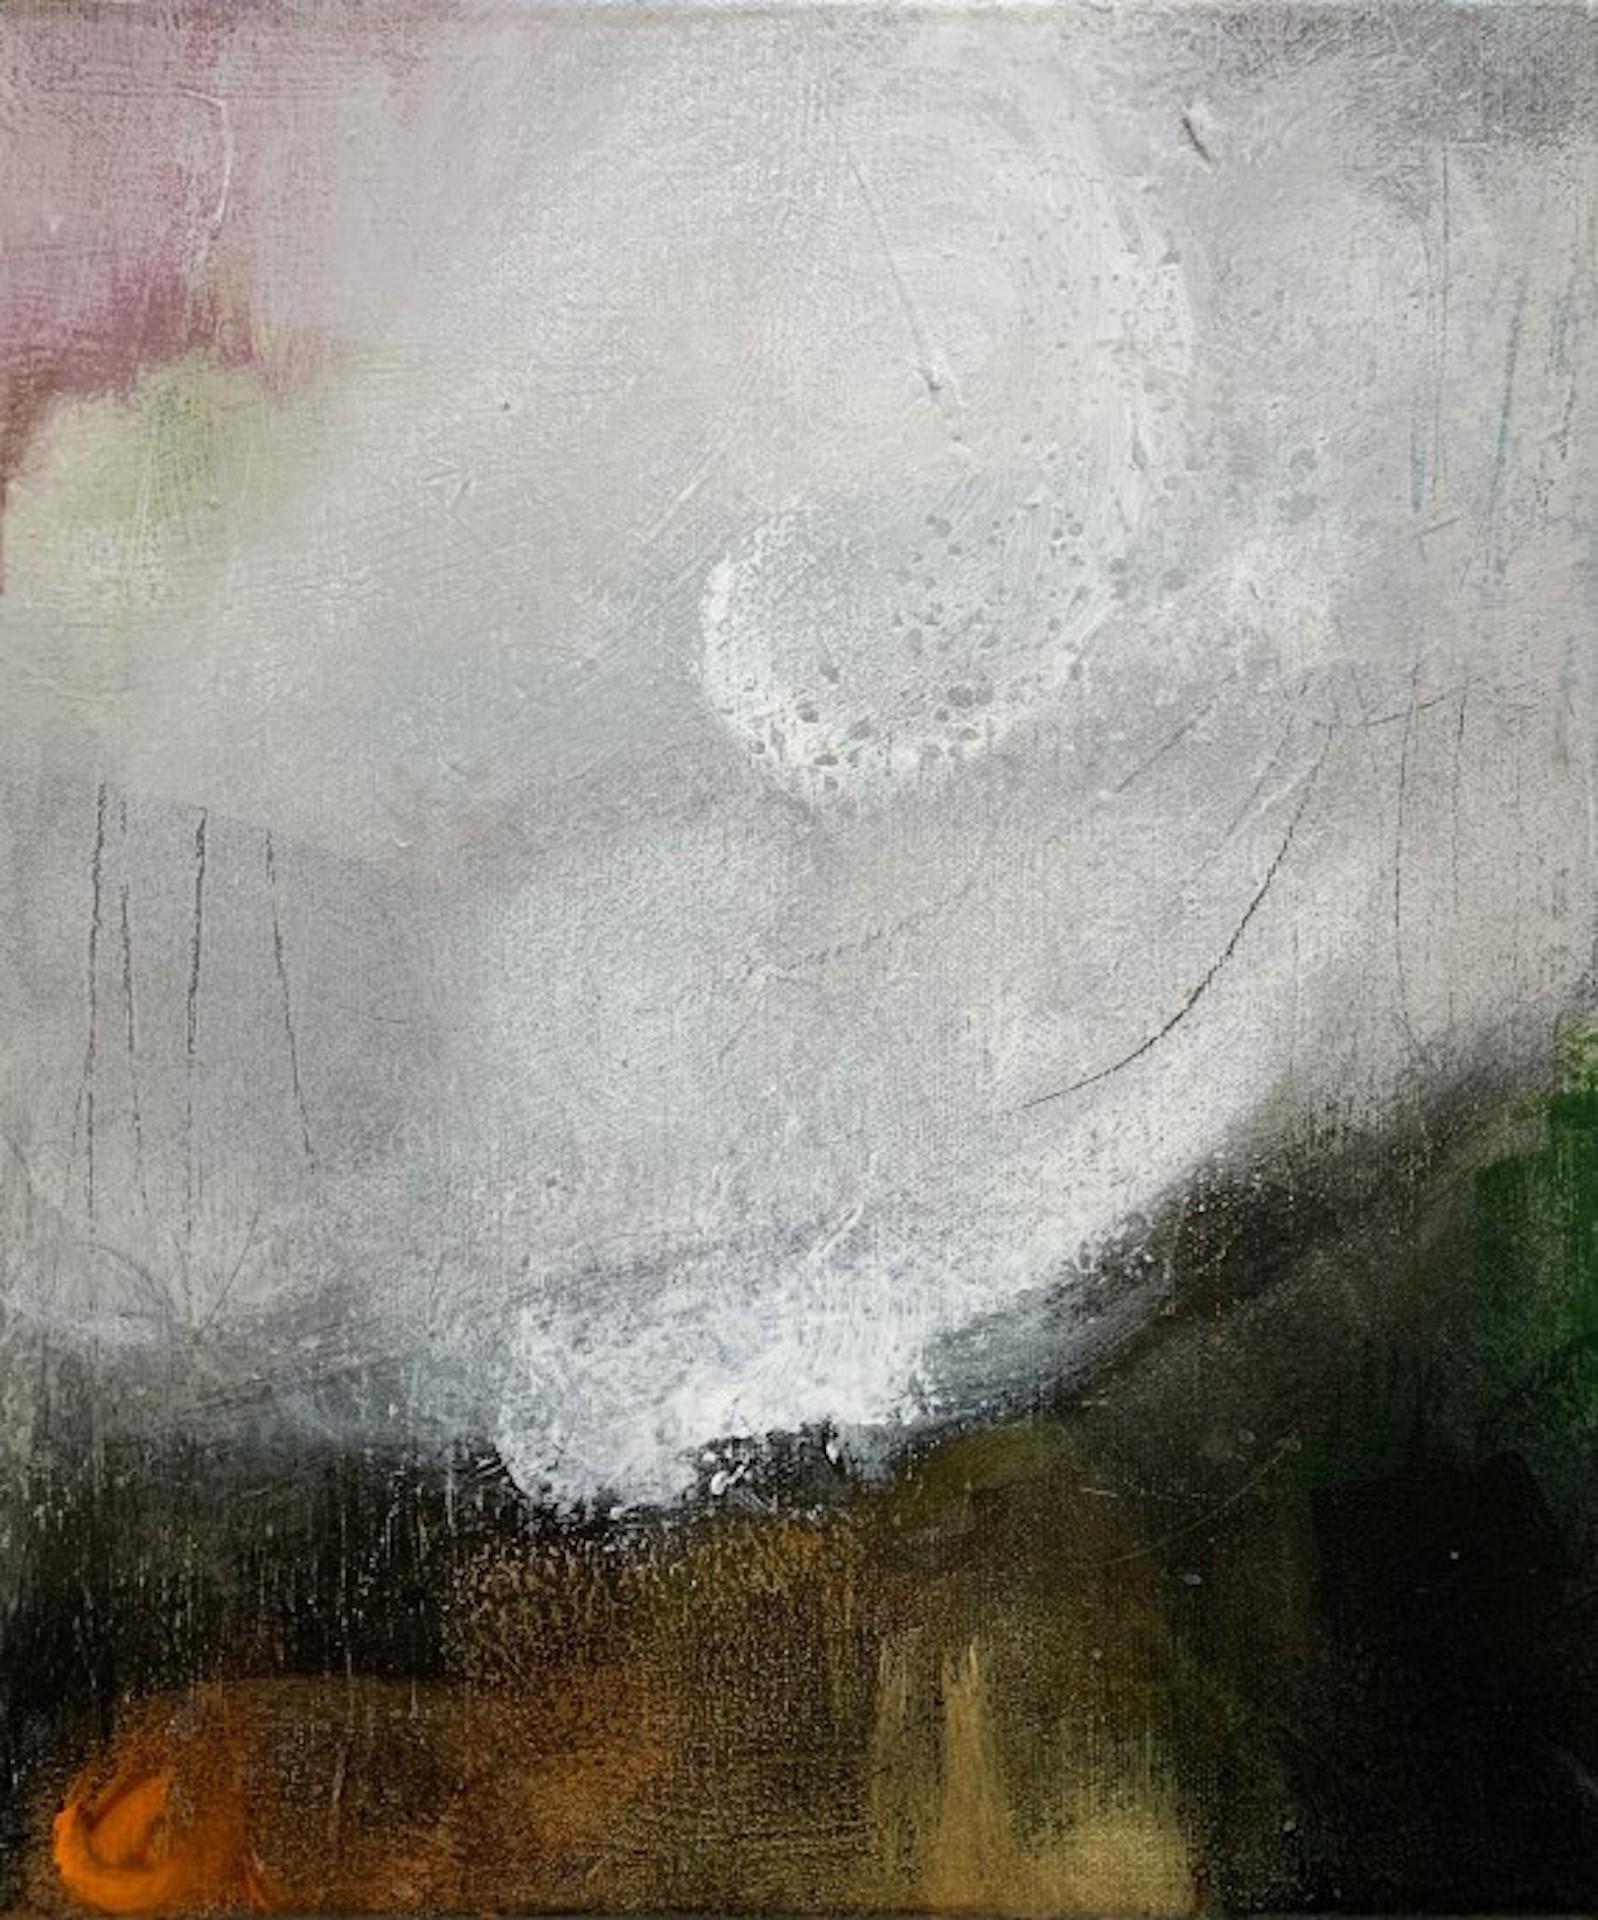 Jill Campbell
Fell Clouds 2 
Original Landscape Painting
Acrylic on canvas
Image Size: H 30cm x W 25cm x D 1.5cm
Framed Size: H 34cm x W 29cm x D 3cm
Sold Framed (Wooden White Float Frame)
Free Shipping
Please note that in situ images are purely an